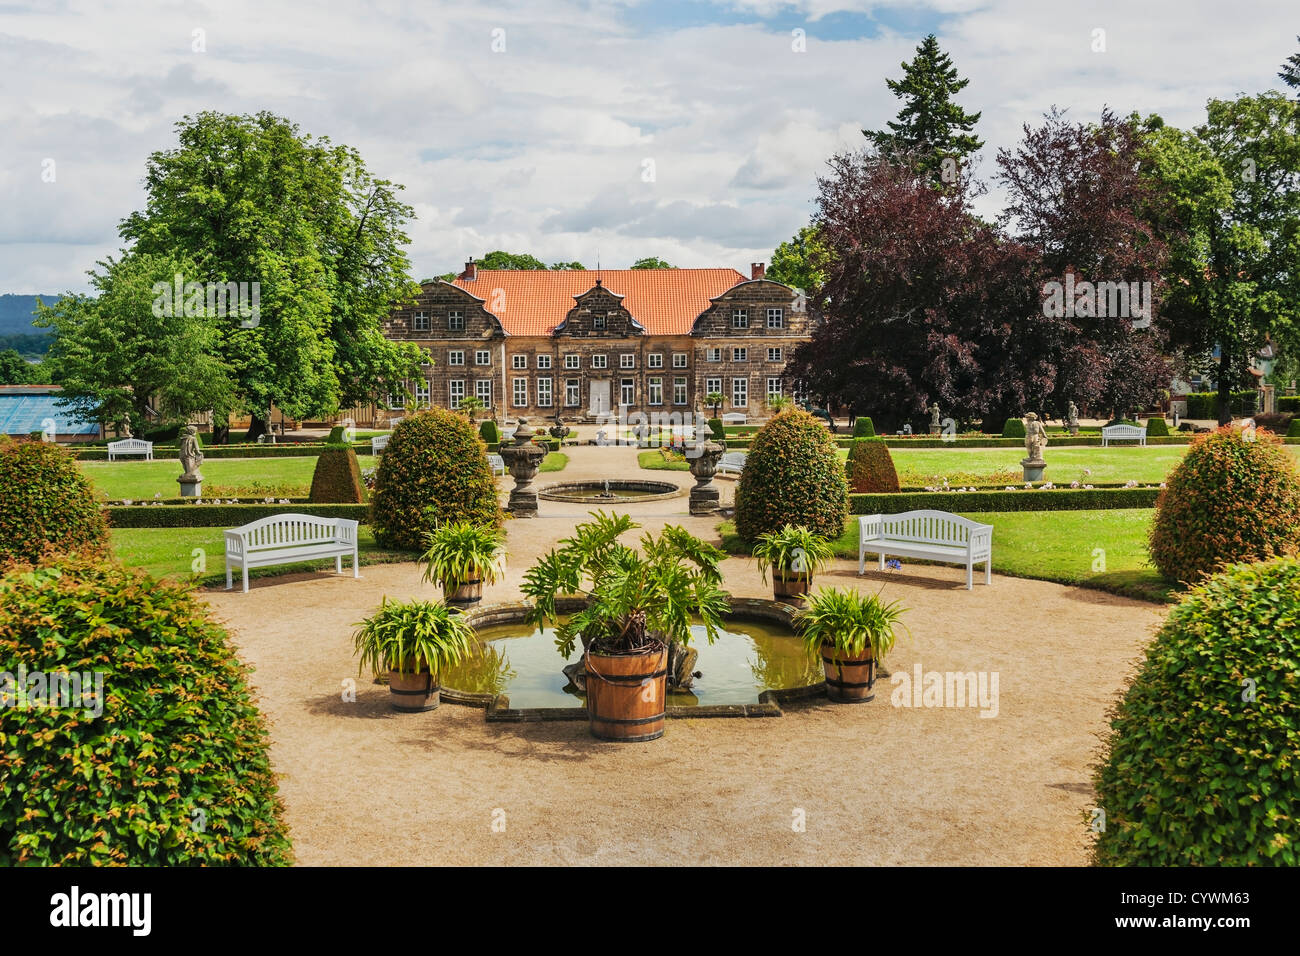 Small castle and park in the Baroque style, Blankenburg, Harz, Saxony-Anhalt, Germany, Europe Stock Photo